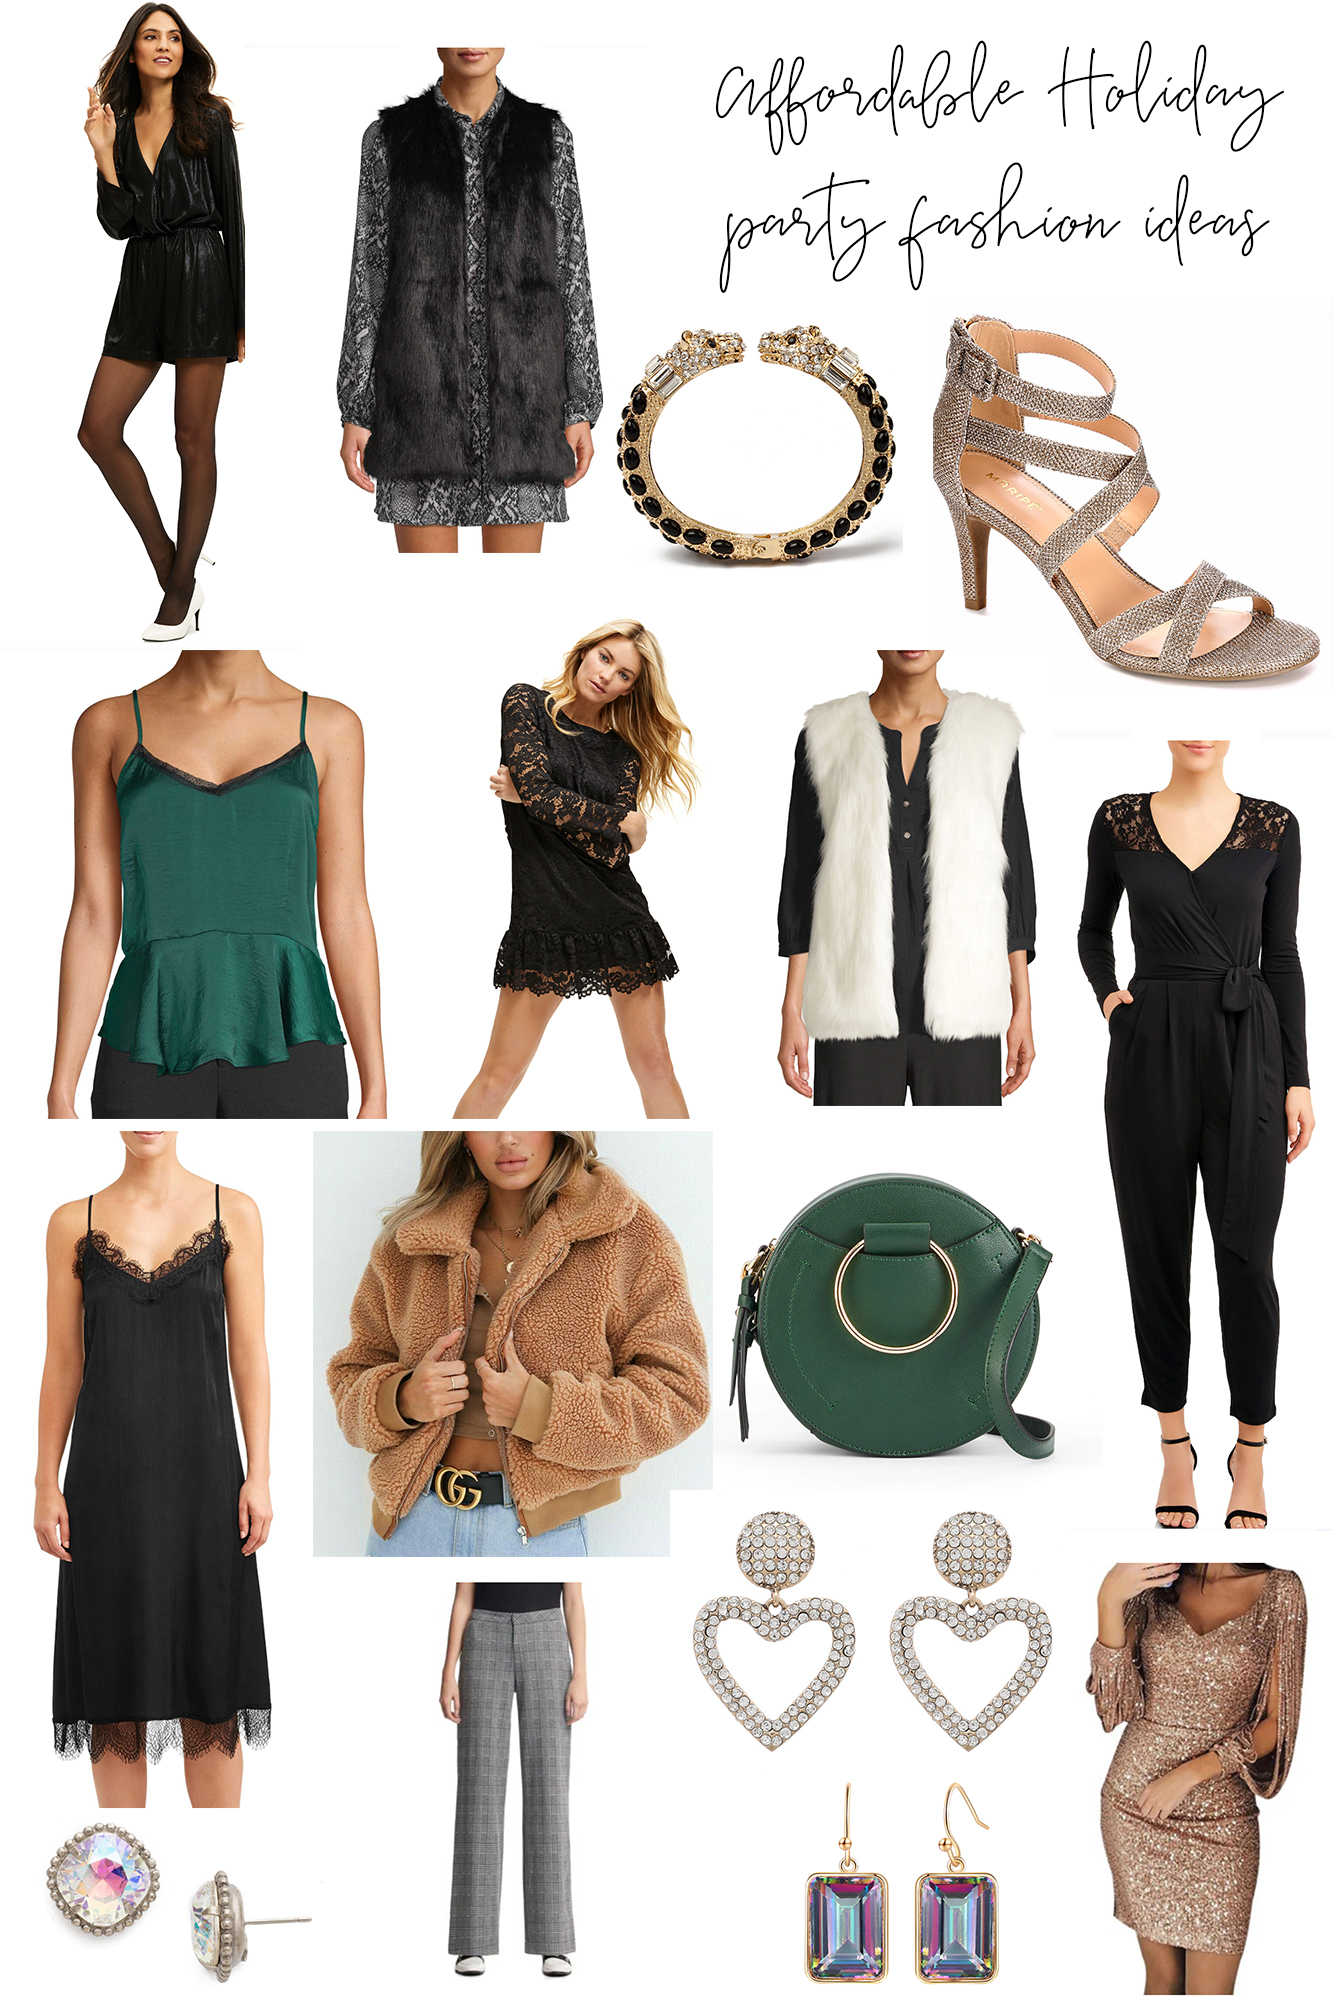 Affordable Holiday Party Fashion Ideas - Tons of cute Christmas party & NYE fashion ideas that are attainable and affordable from Walmart! All are so cute. 